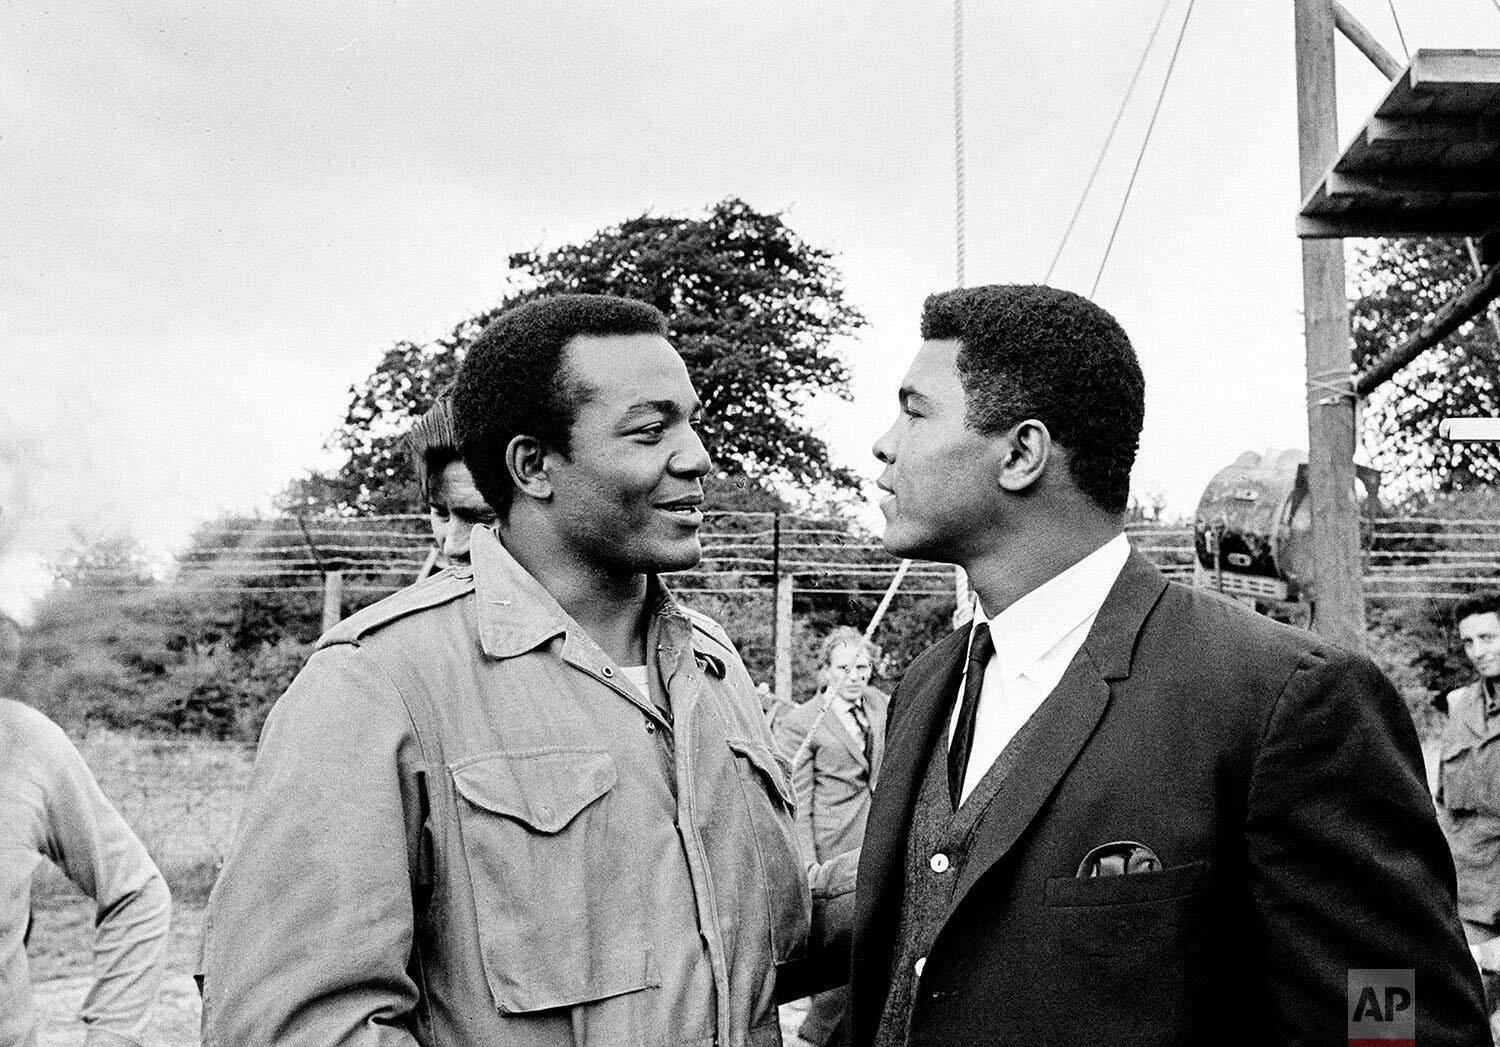  Heavyweight boxer Muhammad Ali, right, visits Cleveland Browns running back and actor Jim Brown on the film set of "The Dirty Dozen" at Morkyate, Bedfordshire, England., Aug. 5, 1966. (AP Photo) 